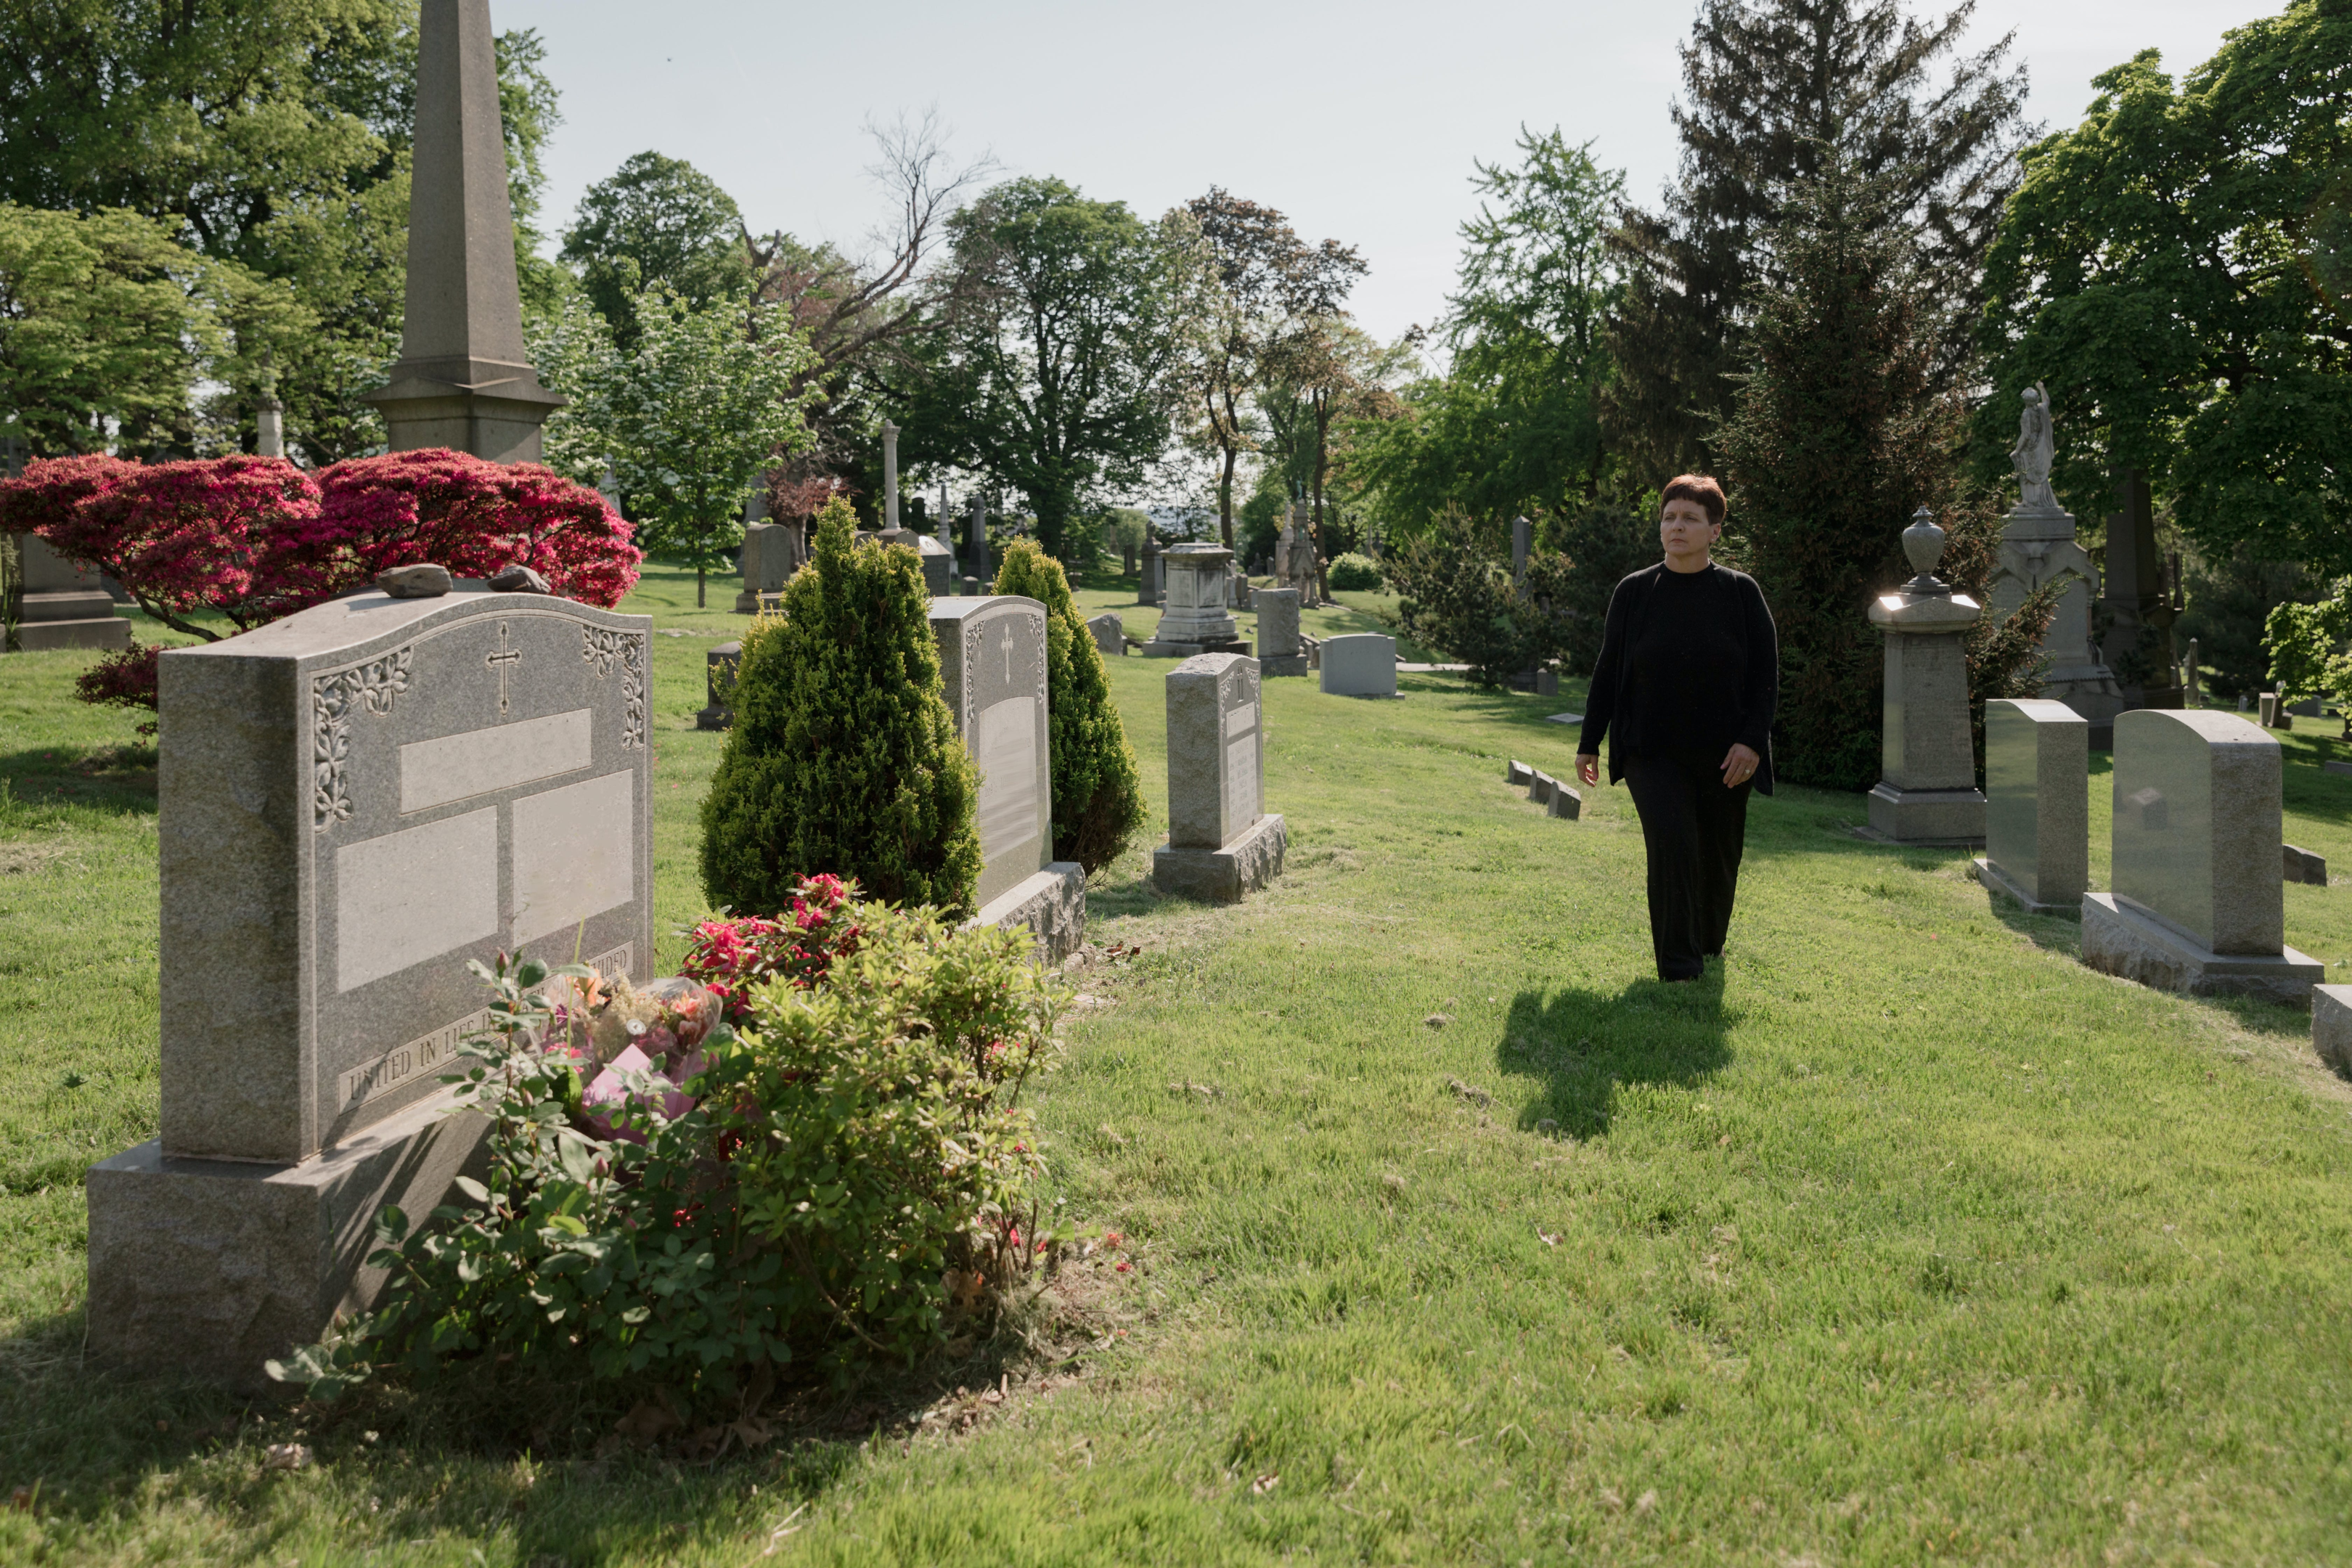 how much coverage do I need for burial expenses and burial insurance?